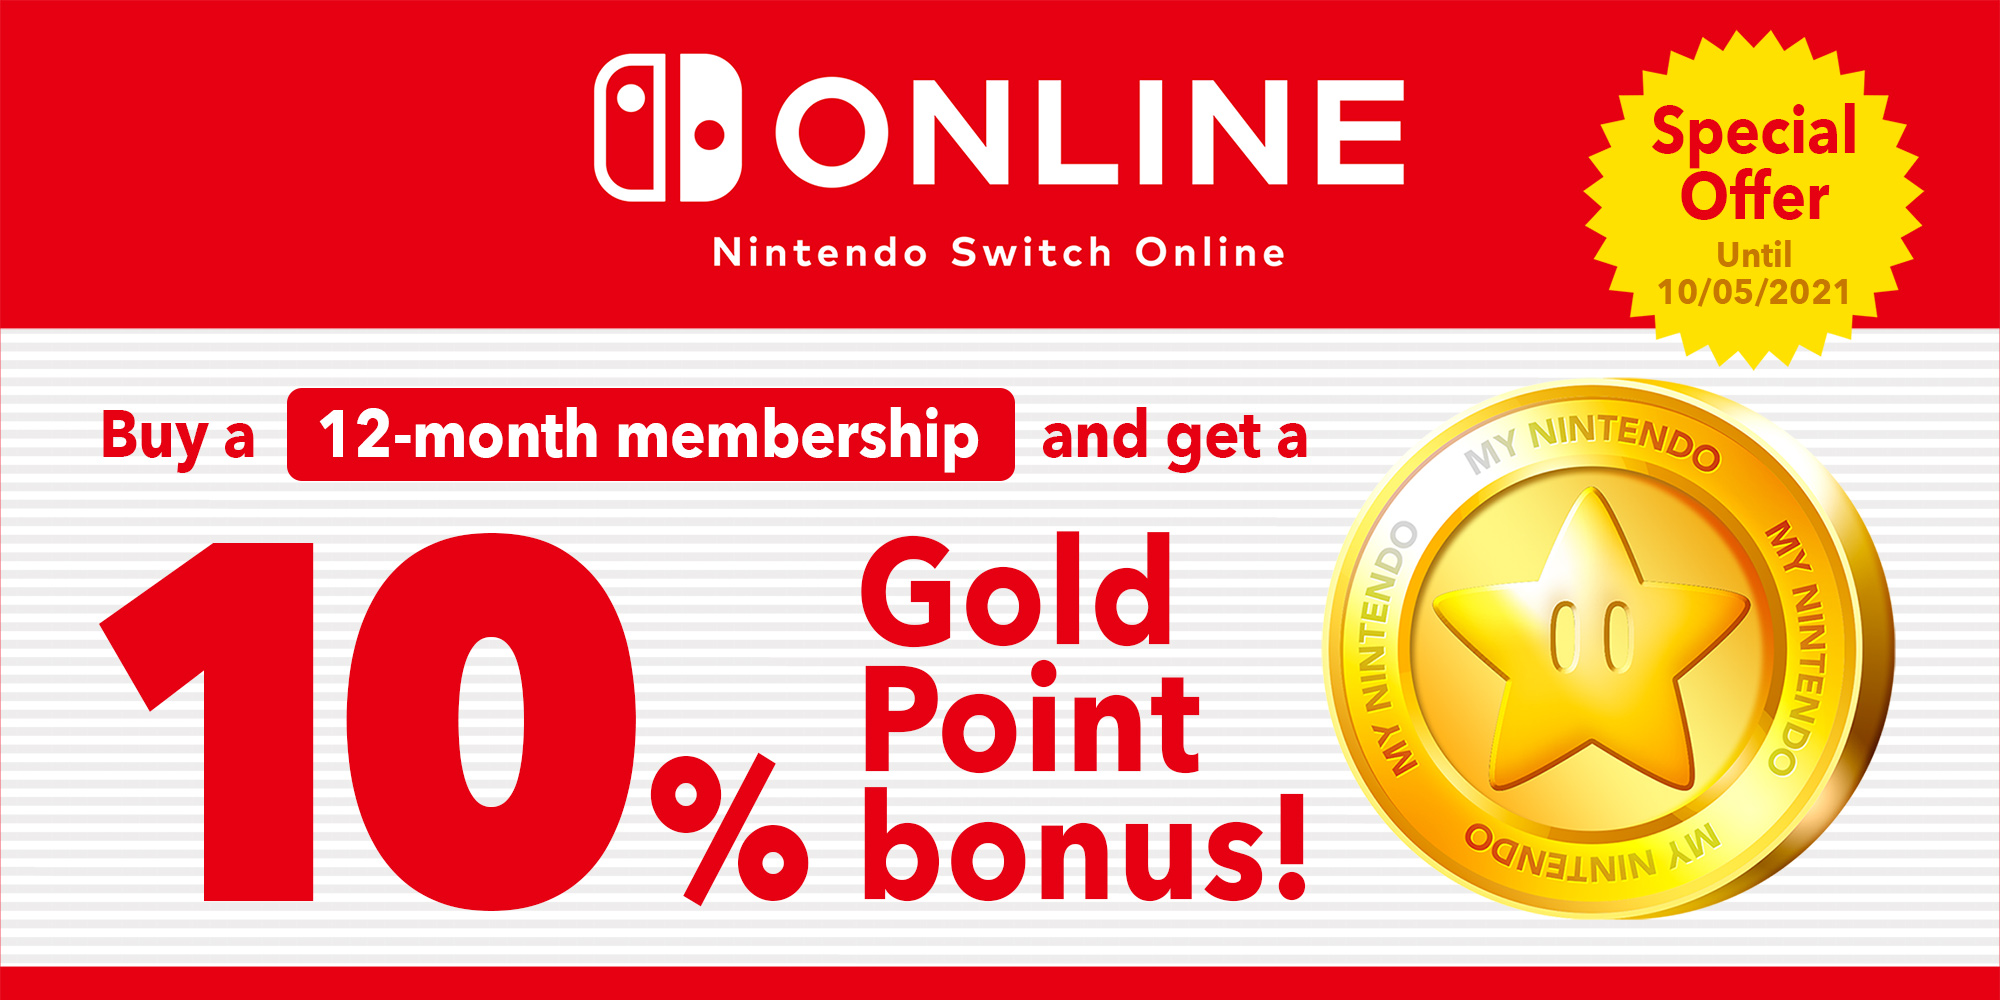 Special offer: Earn up to £3.15/€3.50 in Gold Points with a 12-month Nintendo Switch Online membership!